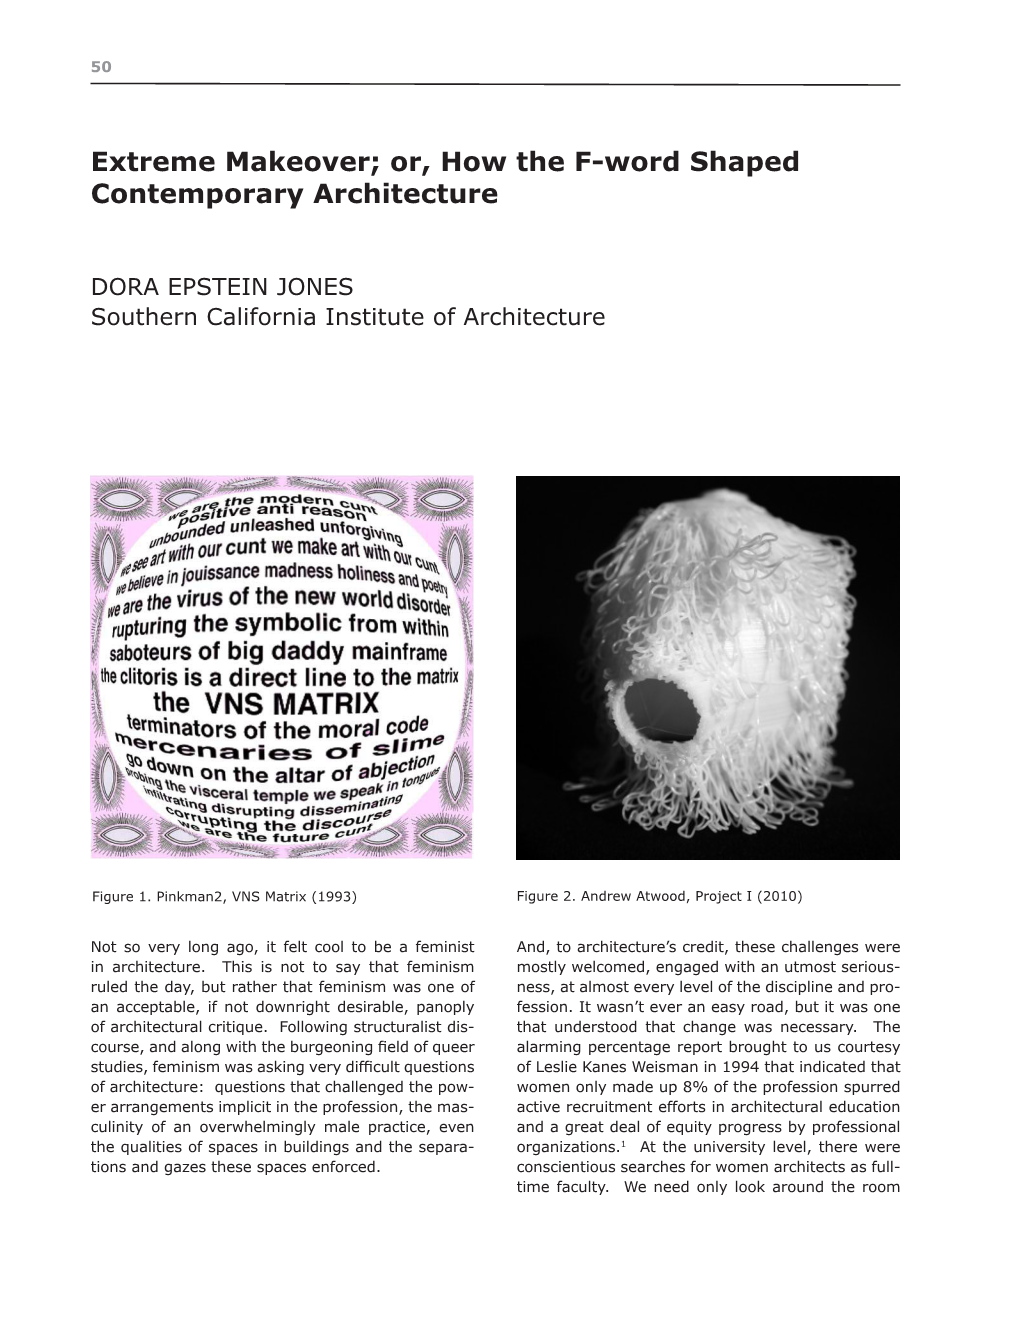 Extreme Makeover; Or, How the F-Word Shaped Contemporary Architecture